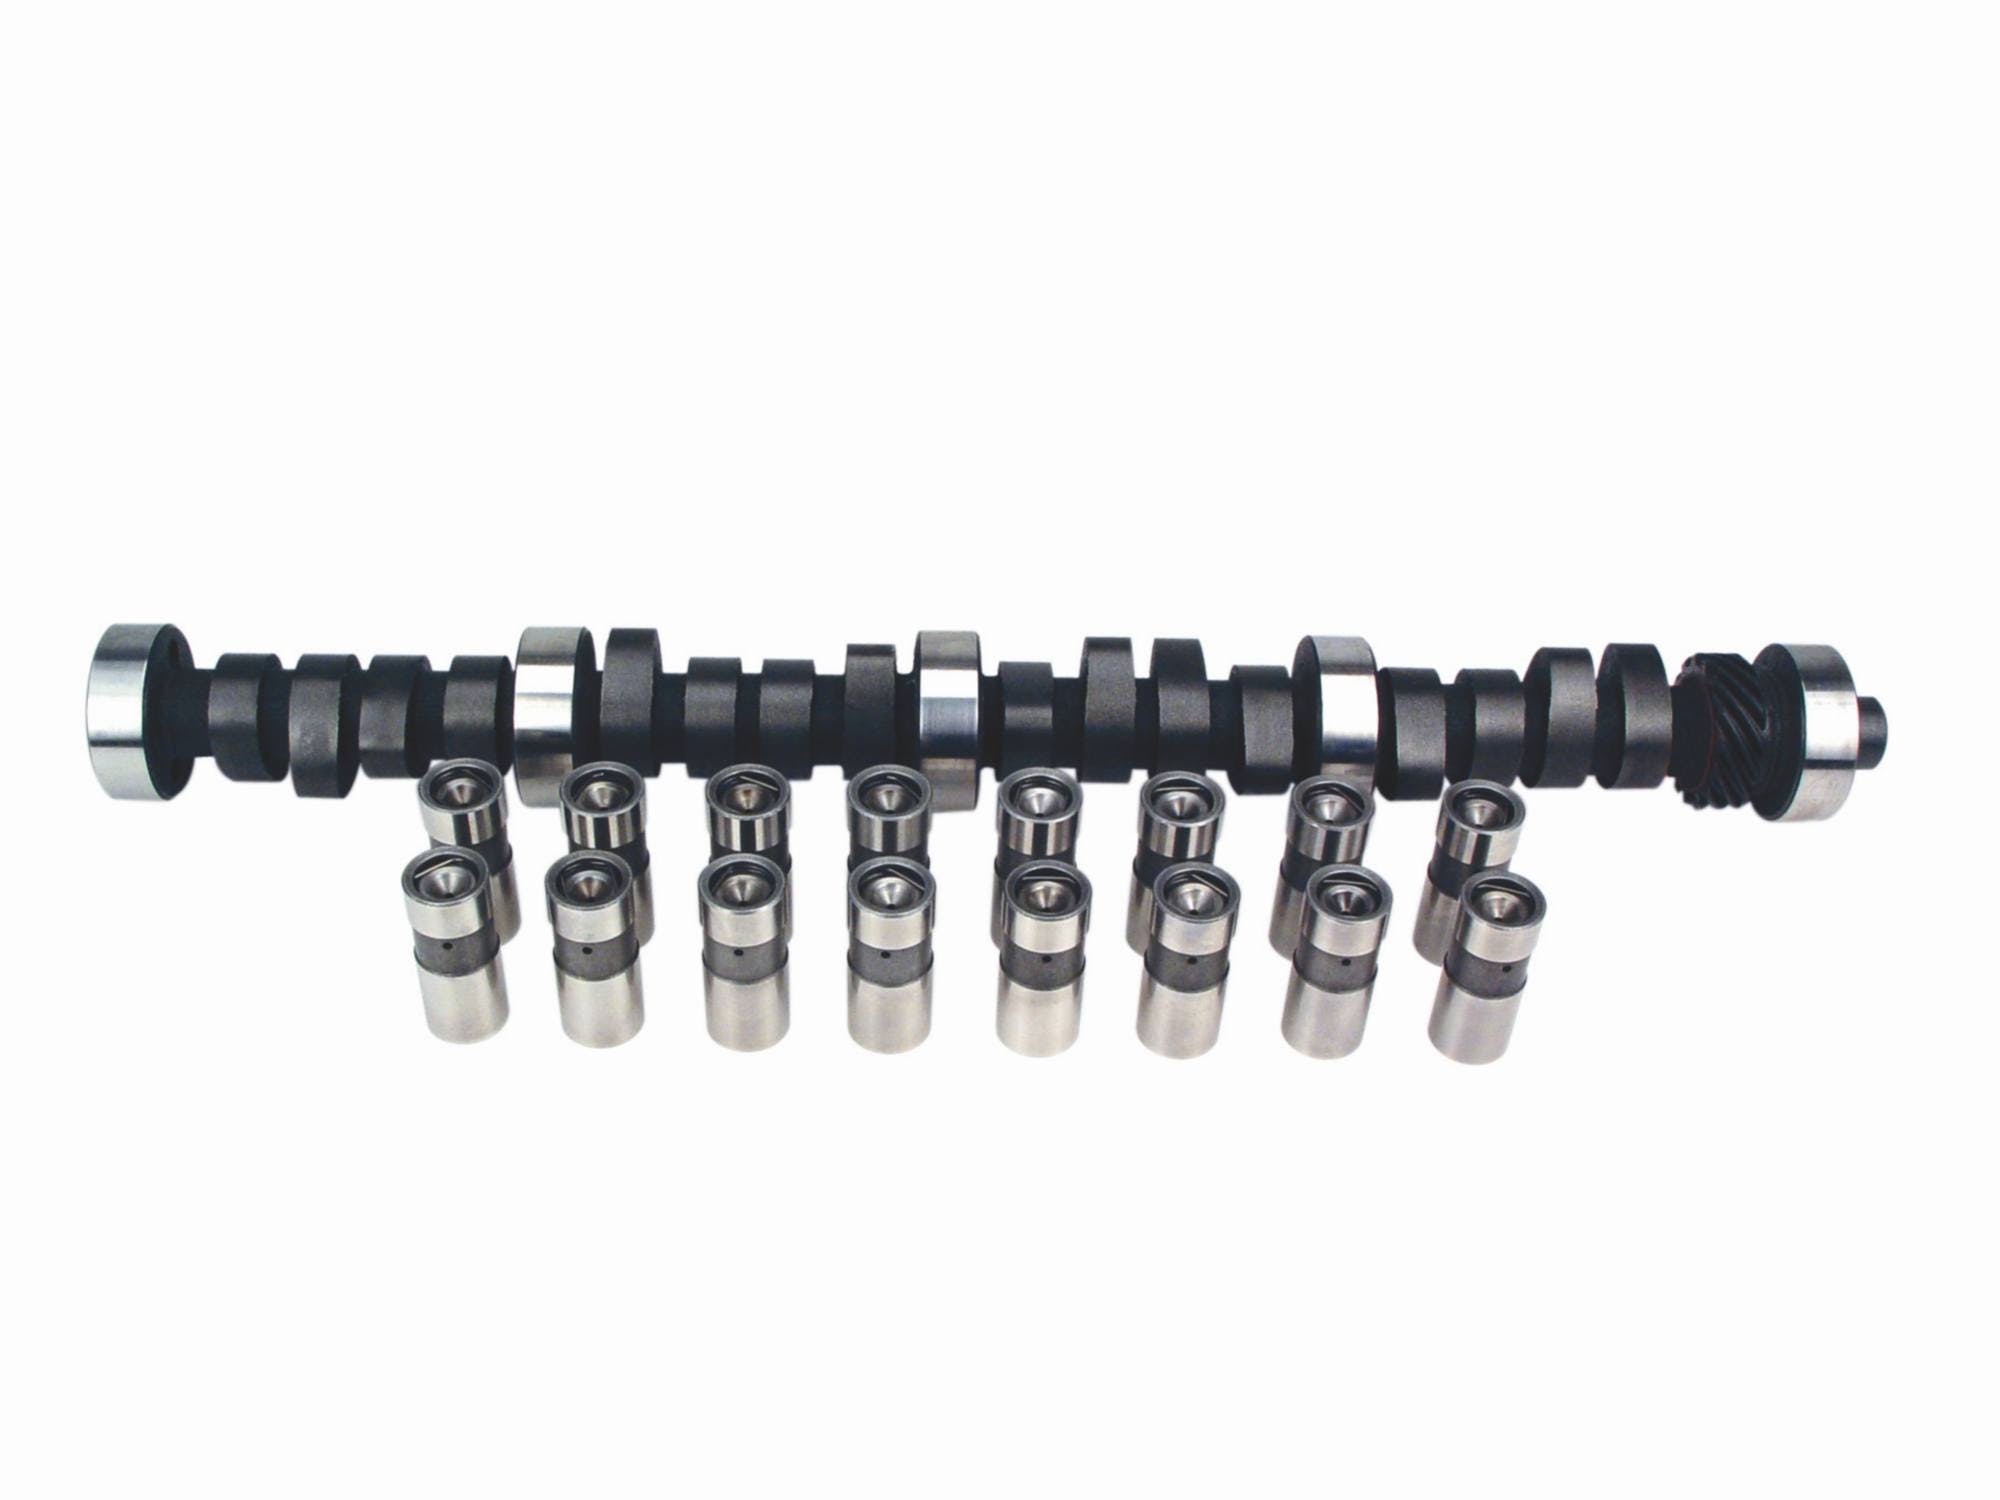 Competition Cams CL31-670-4 Nostalgia Plus Camshaft/Lifter Kit